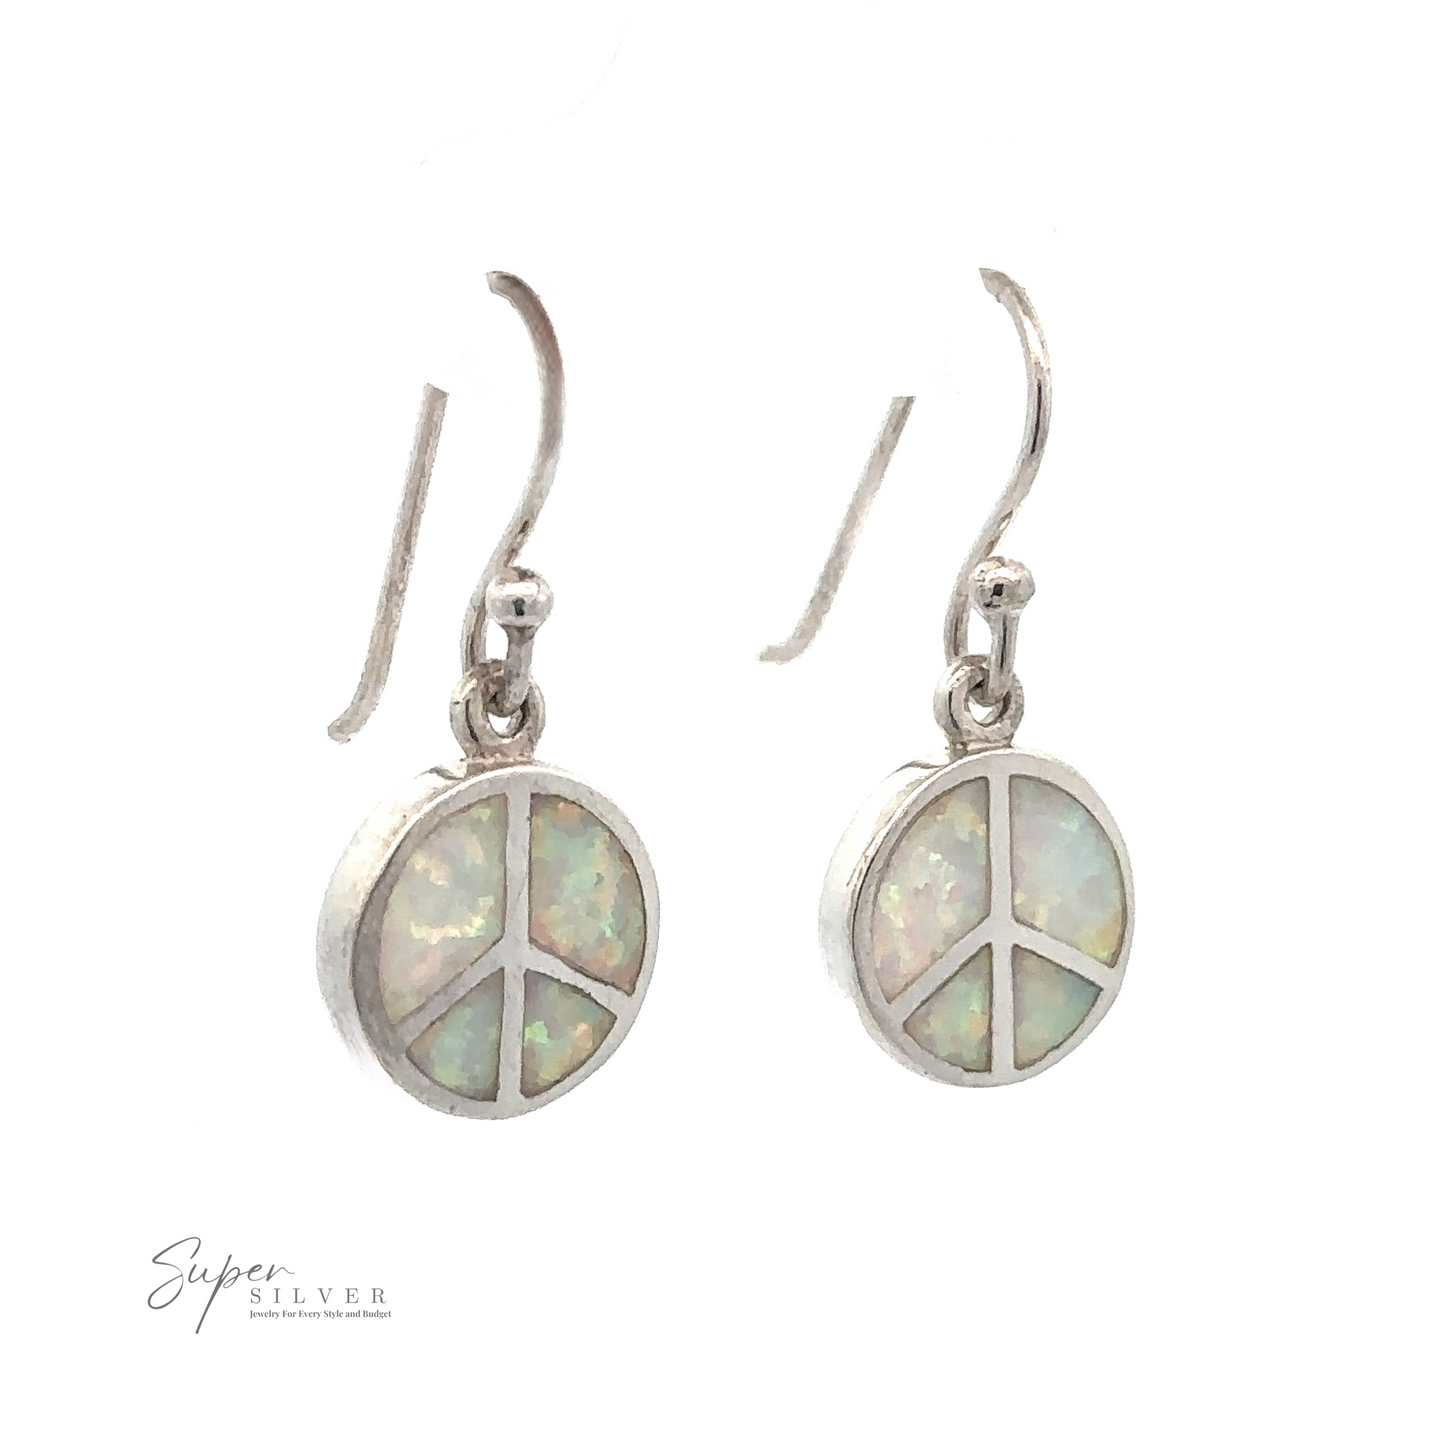 White Created Opal Round Peace Sign Earrings featuring iridescent white created opal inlays, highlighted on a plain white background.